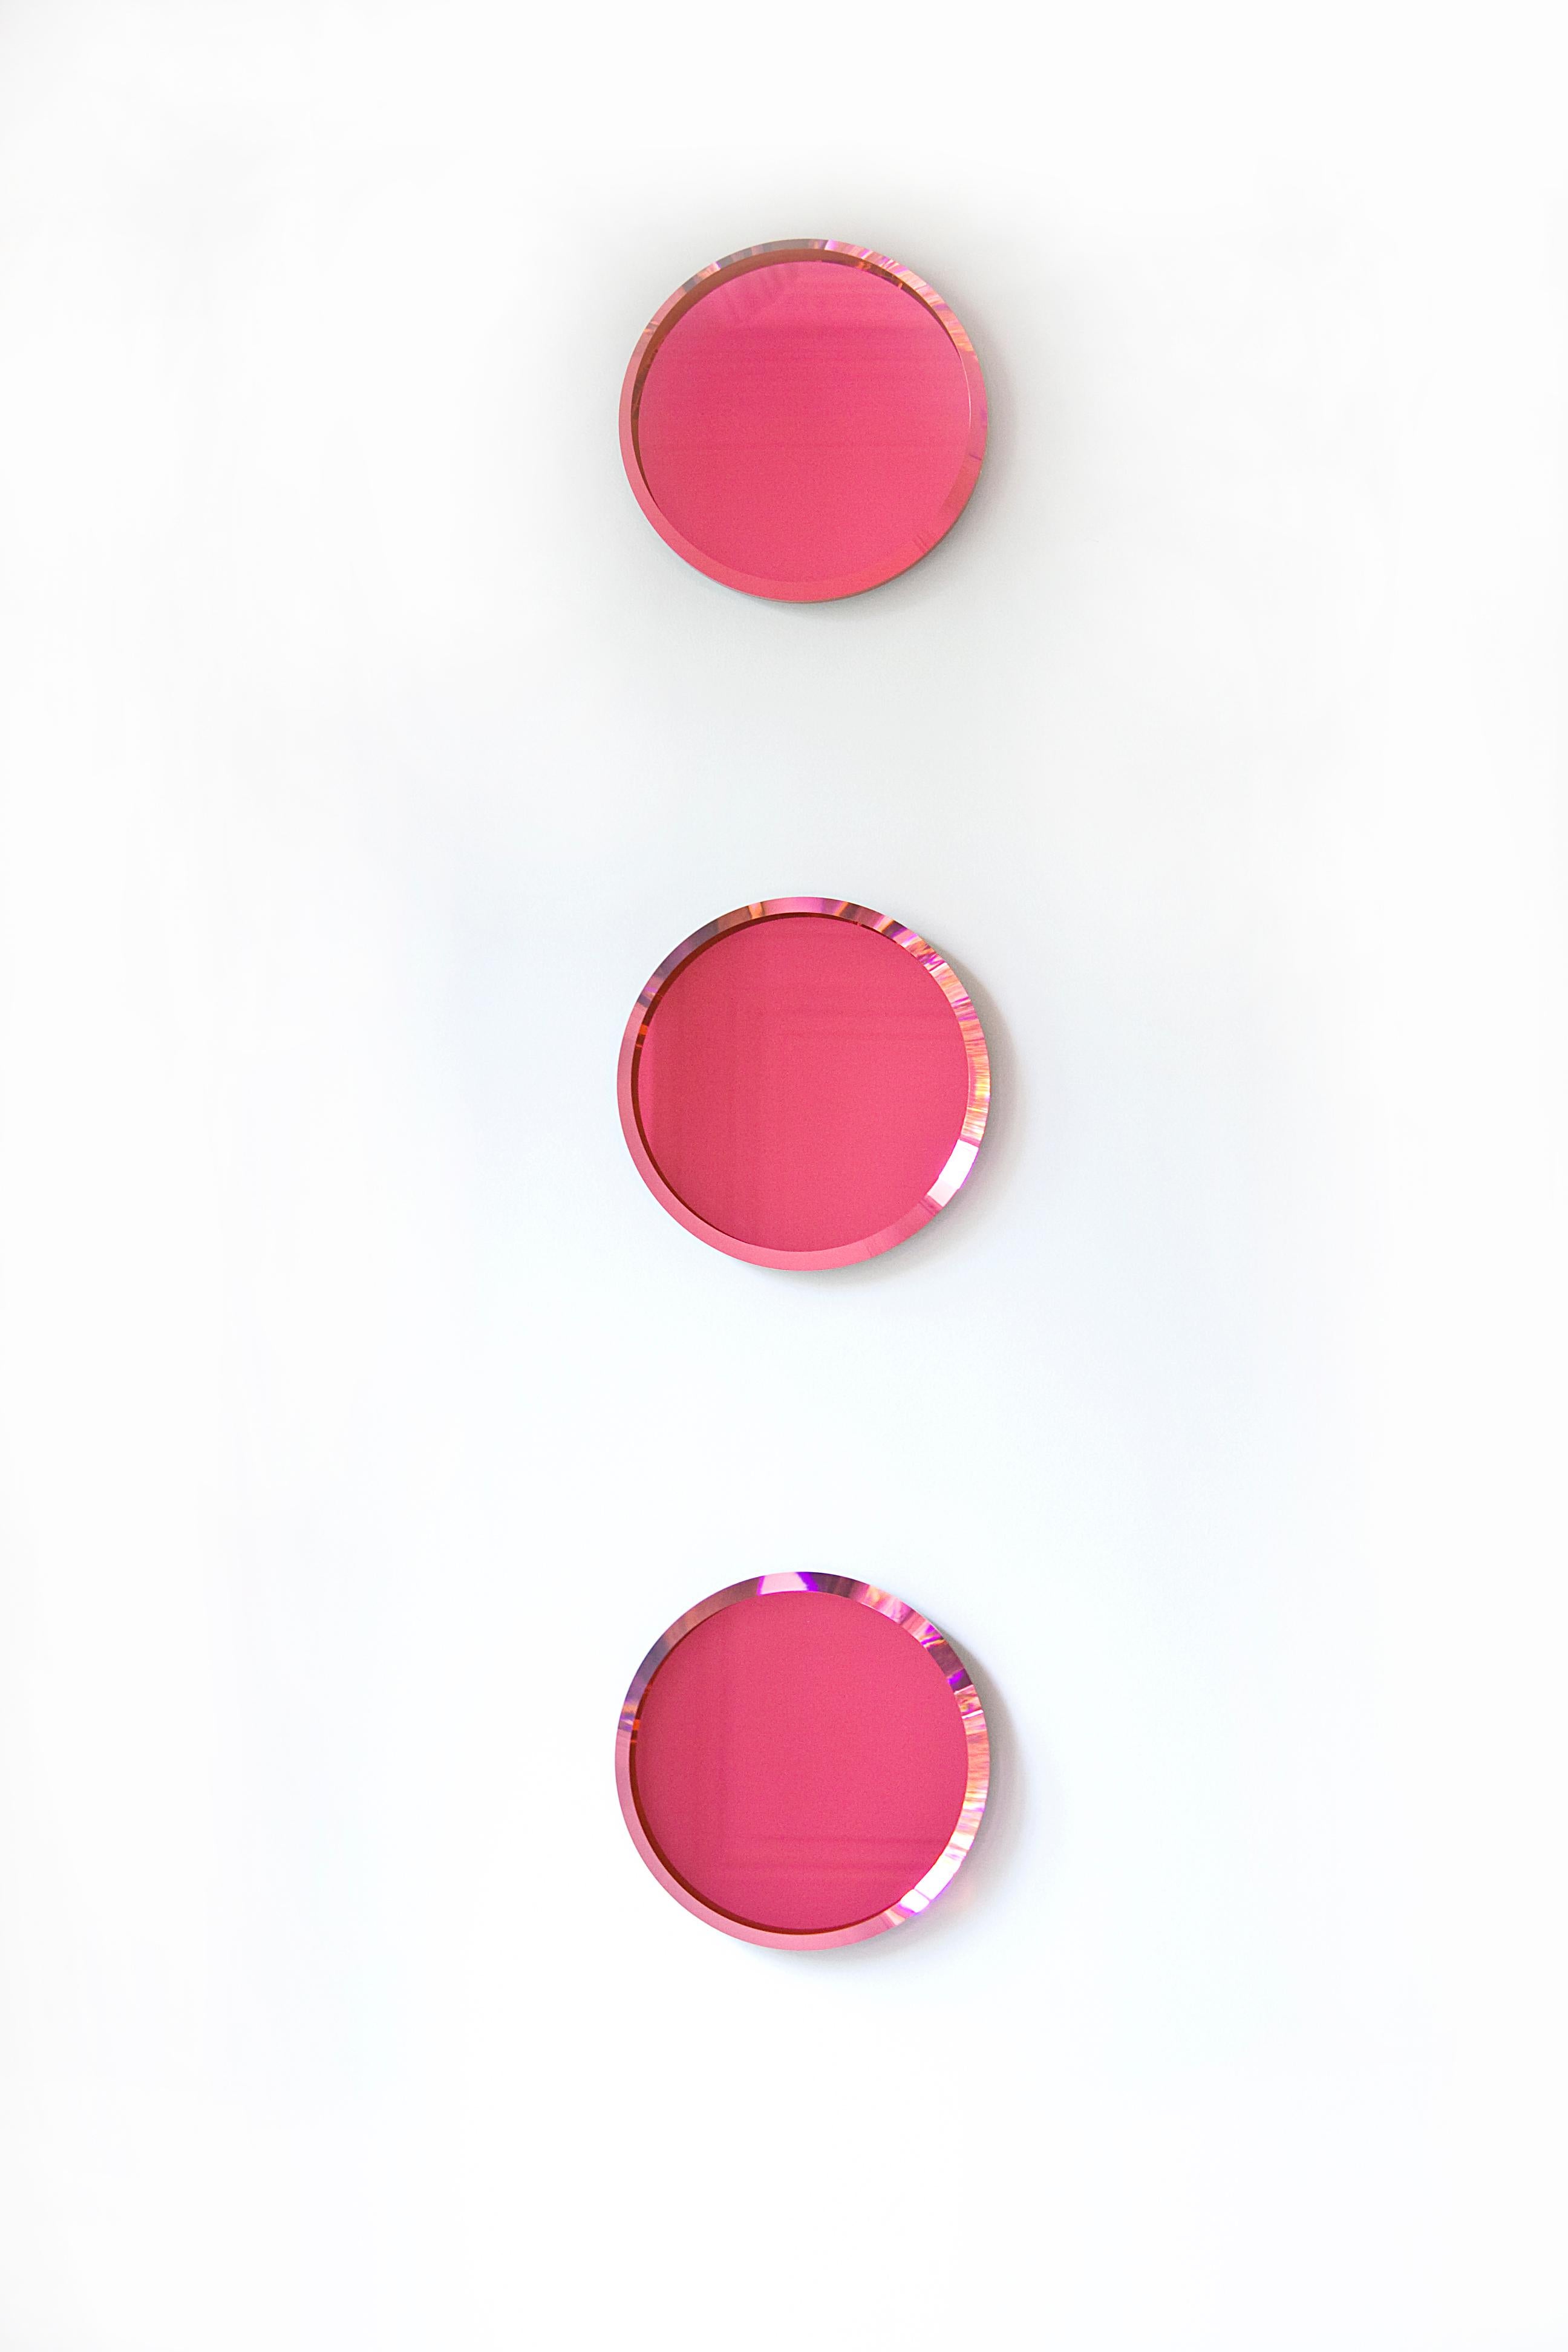 This wall mounted circular colored glass and mirror decoration is an eye-catching focal point playing with color and reflection!
Available in pink or blue.